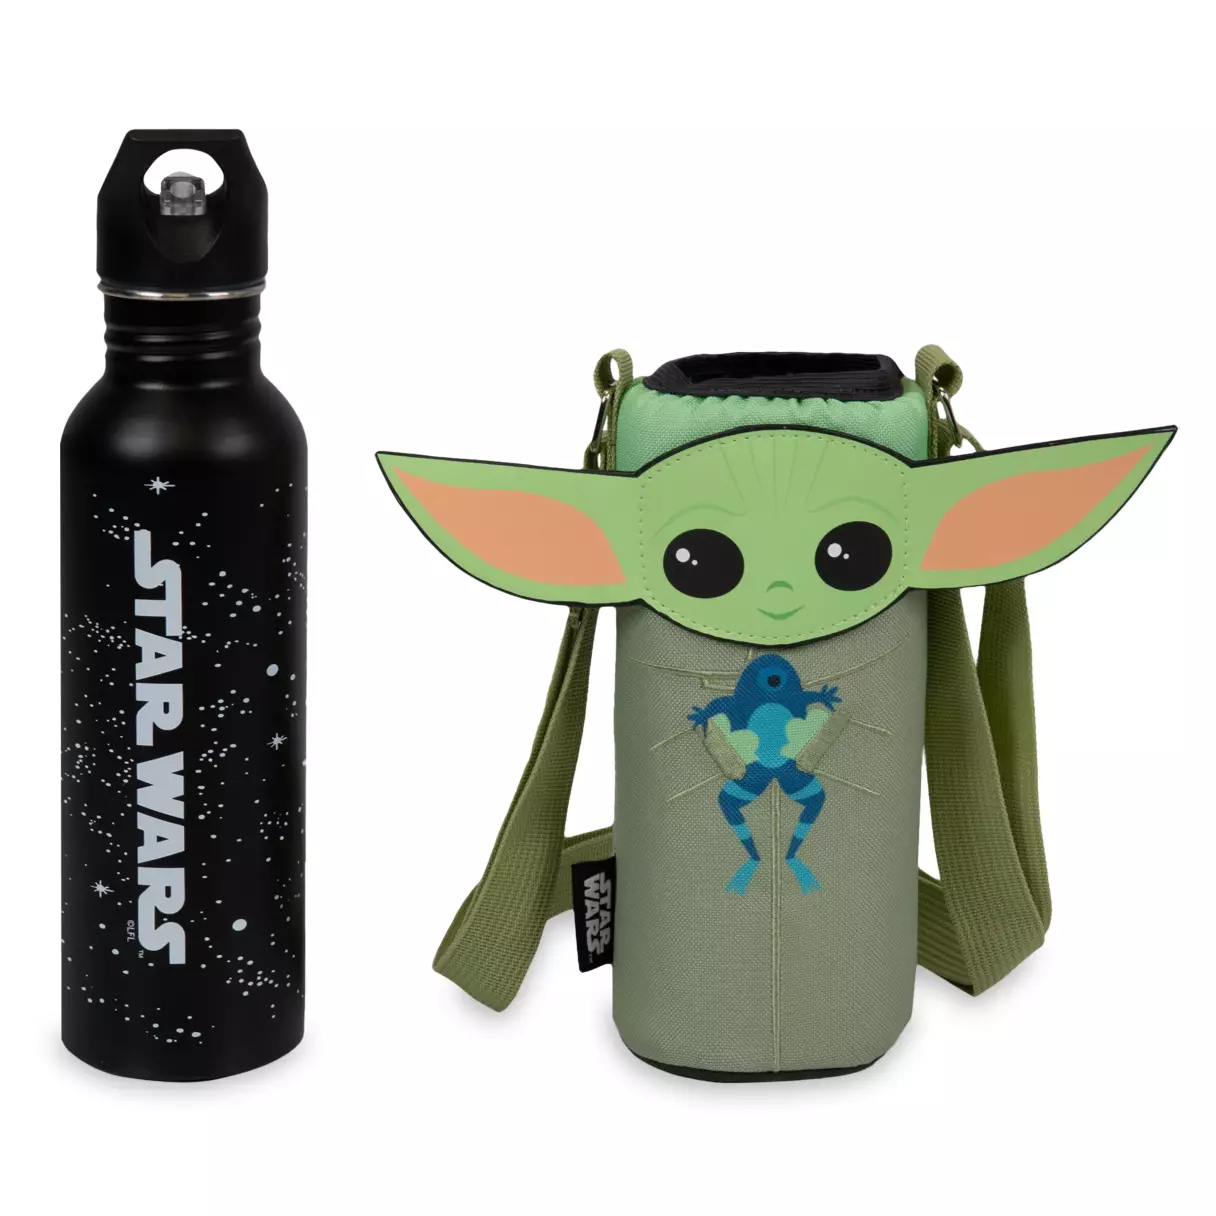 TM The Child (Grogu) Stainless Steel Water Bottle and Cooler Tote Set 2